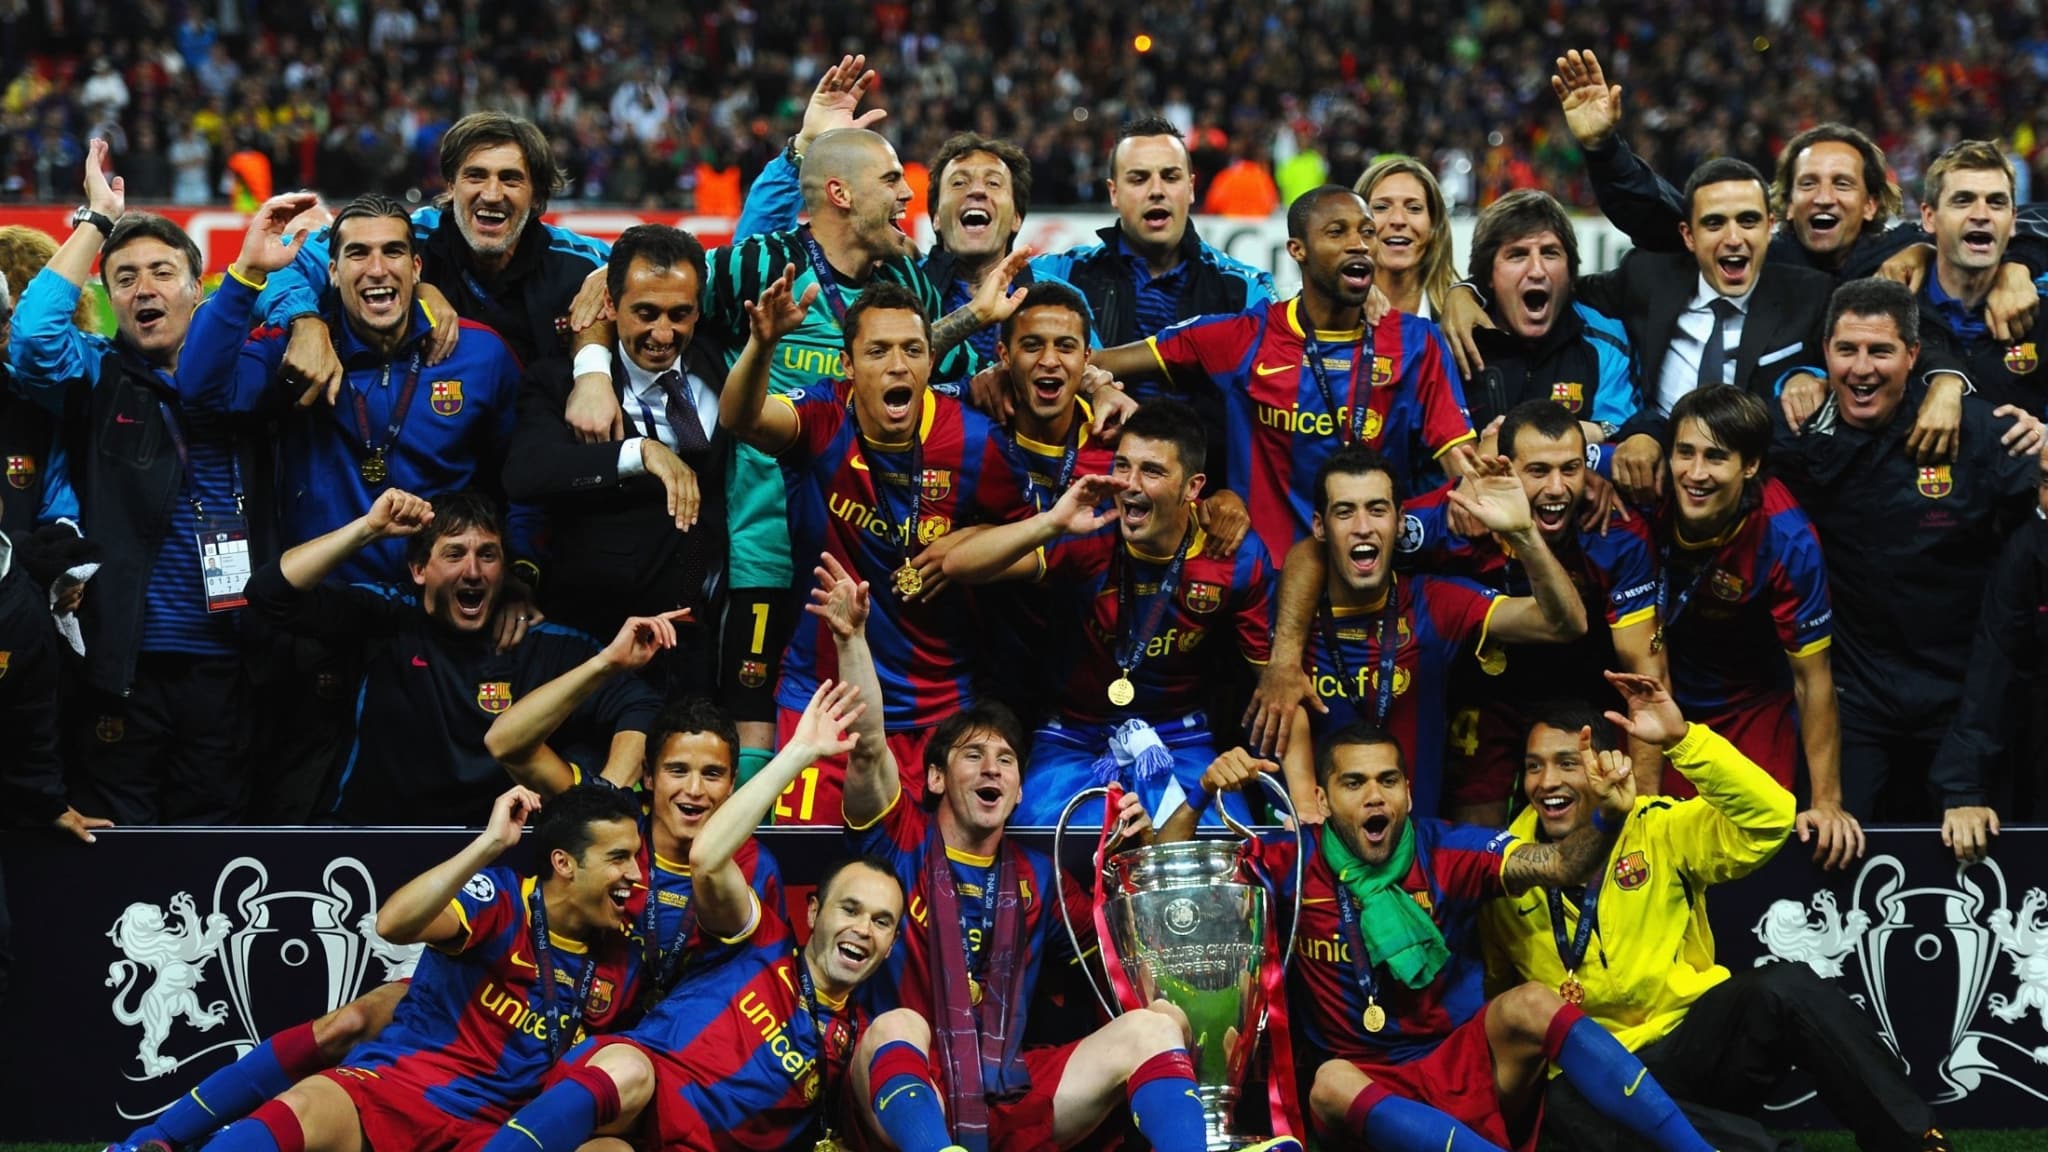 Barcelona Celebrate With The Trophy - Champions League Final 2011 - HD Wallpaper 